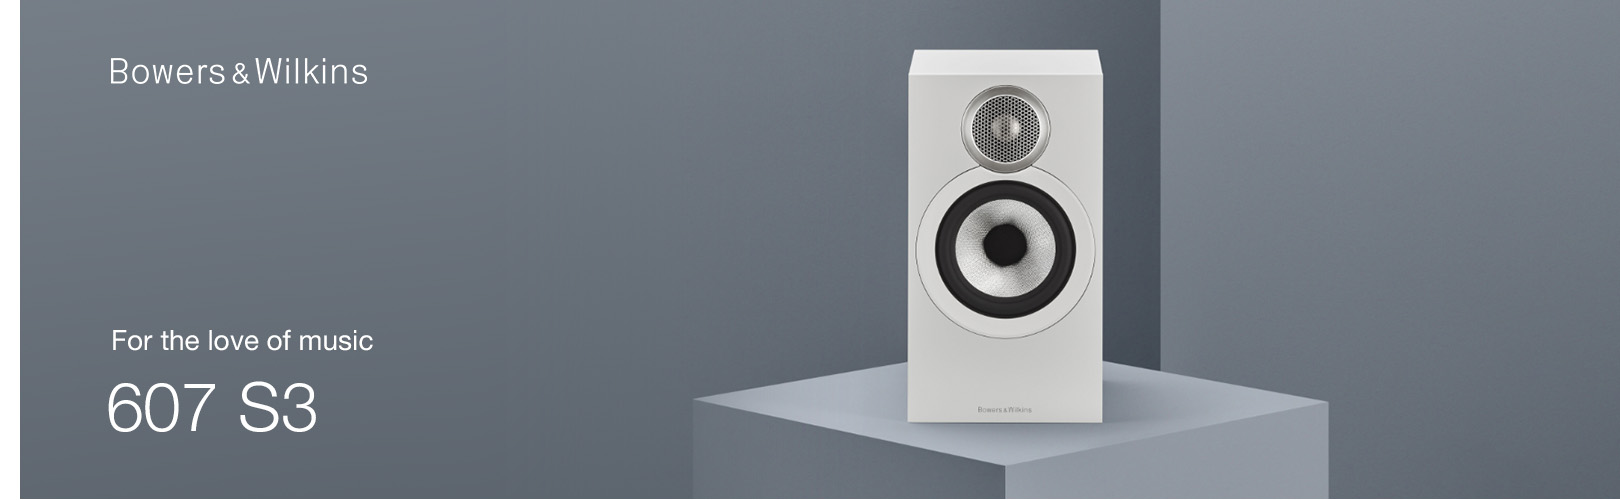 Bowers & Wilkins - For the love of music - 607 S3